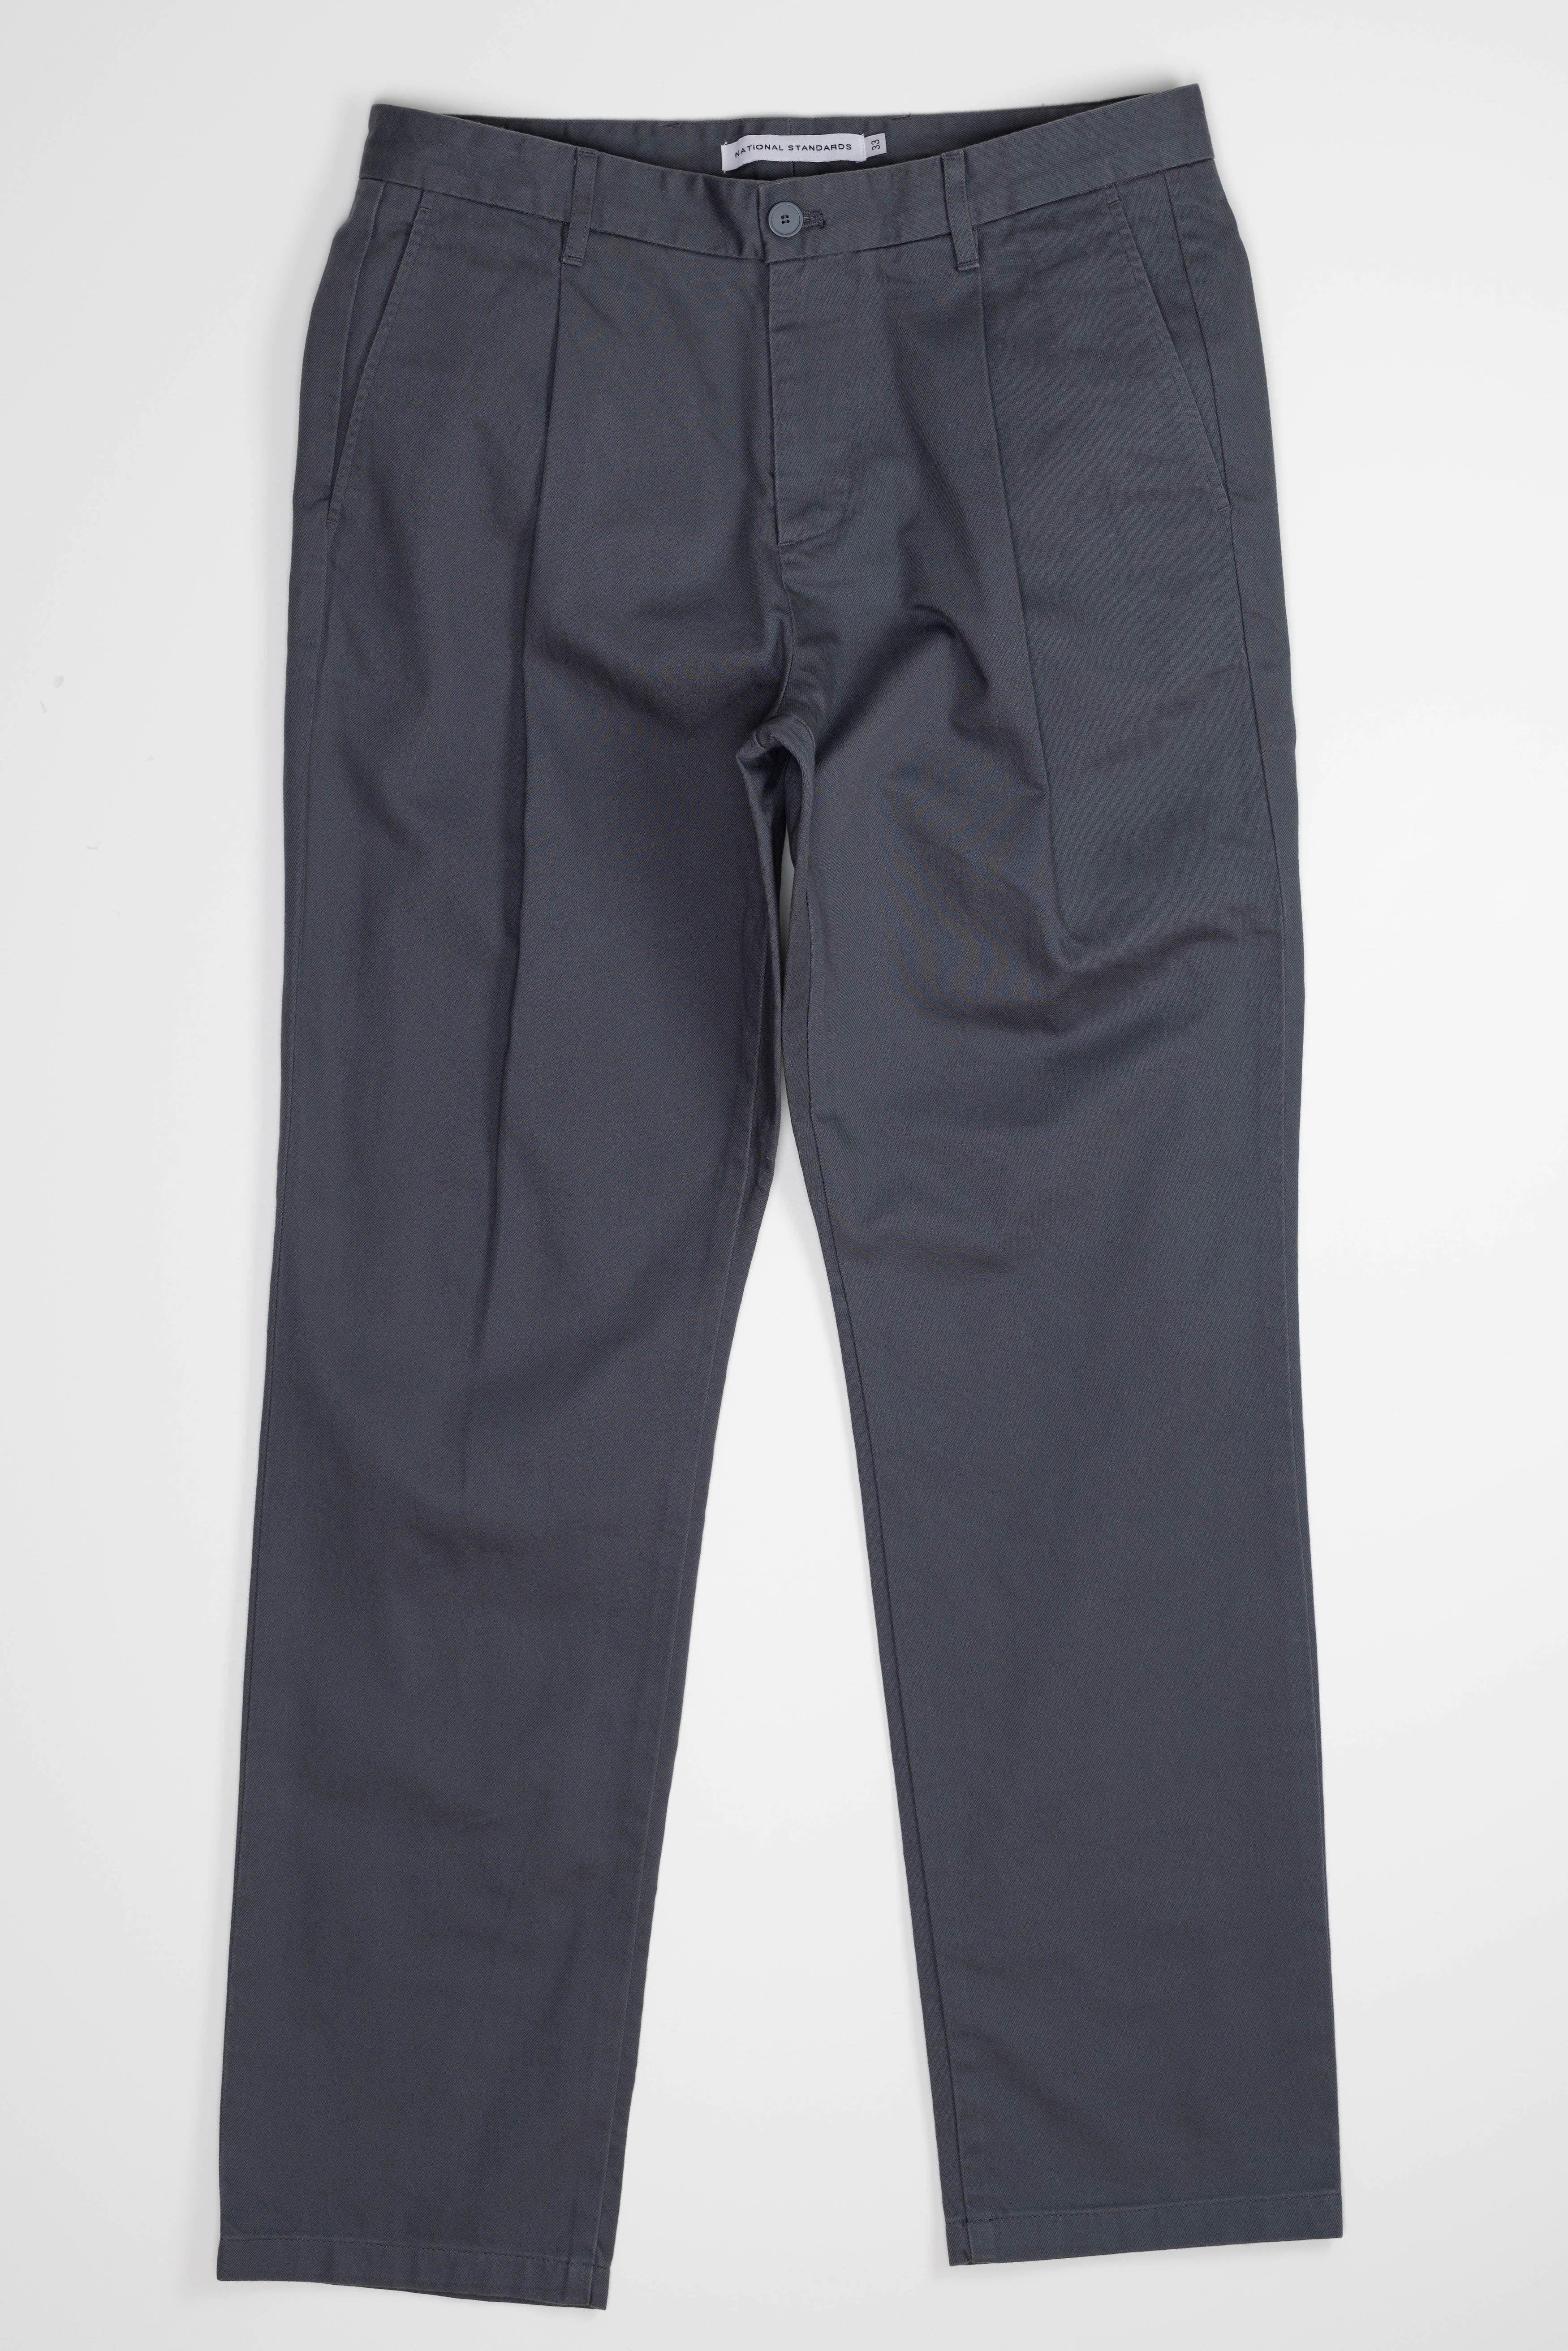 Pleated Chino Vintage French Drill in Blue Grey 05